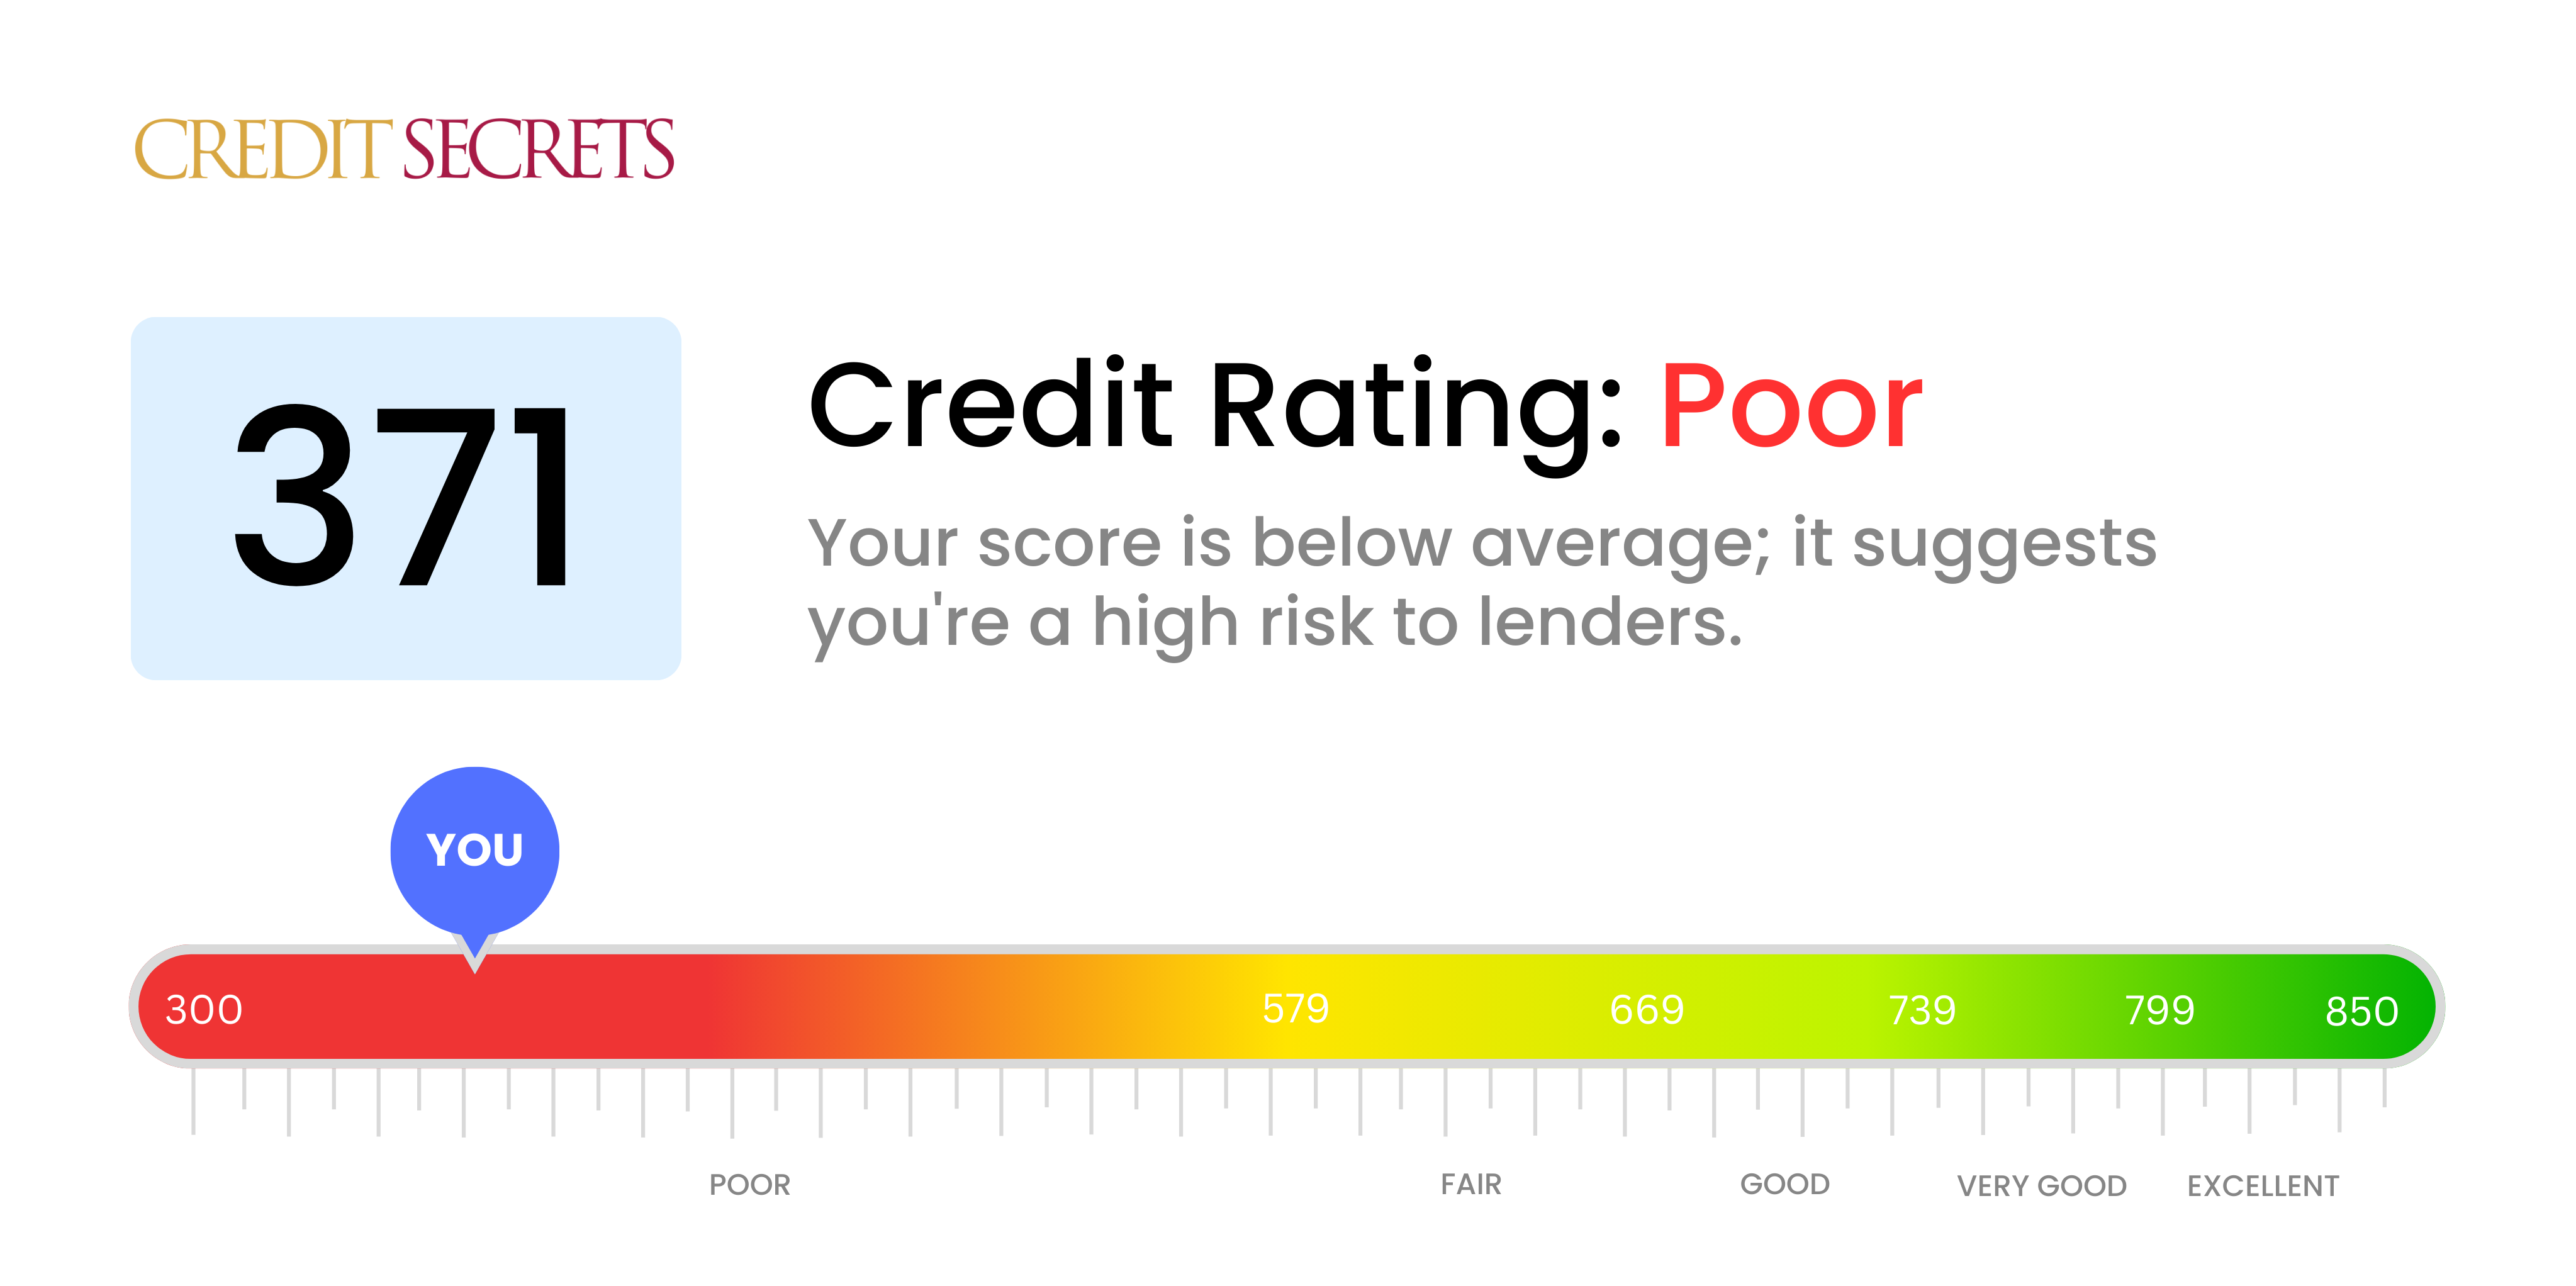 Is 371 a good credit score?